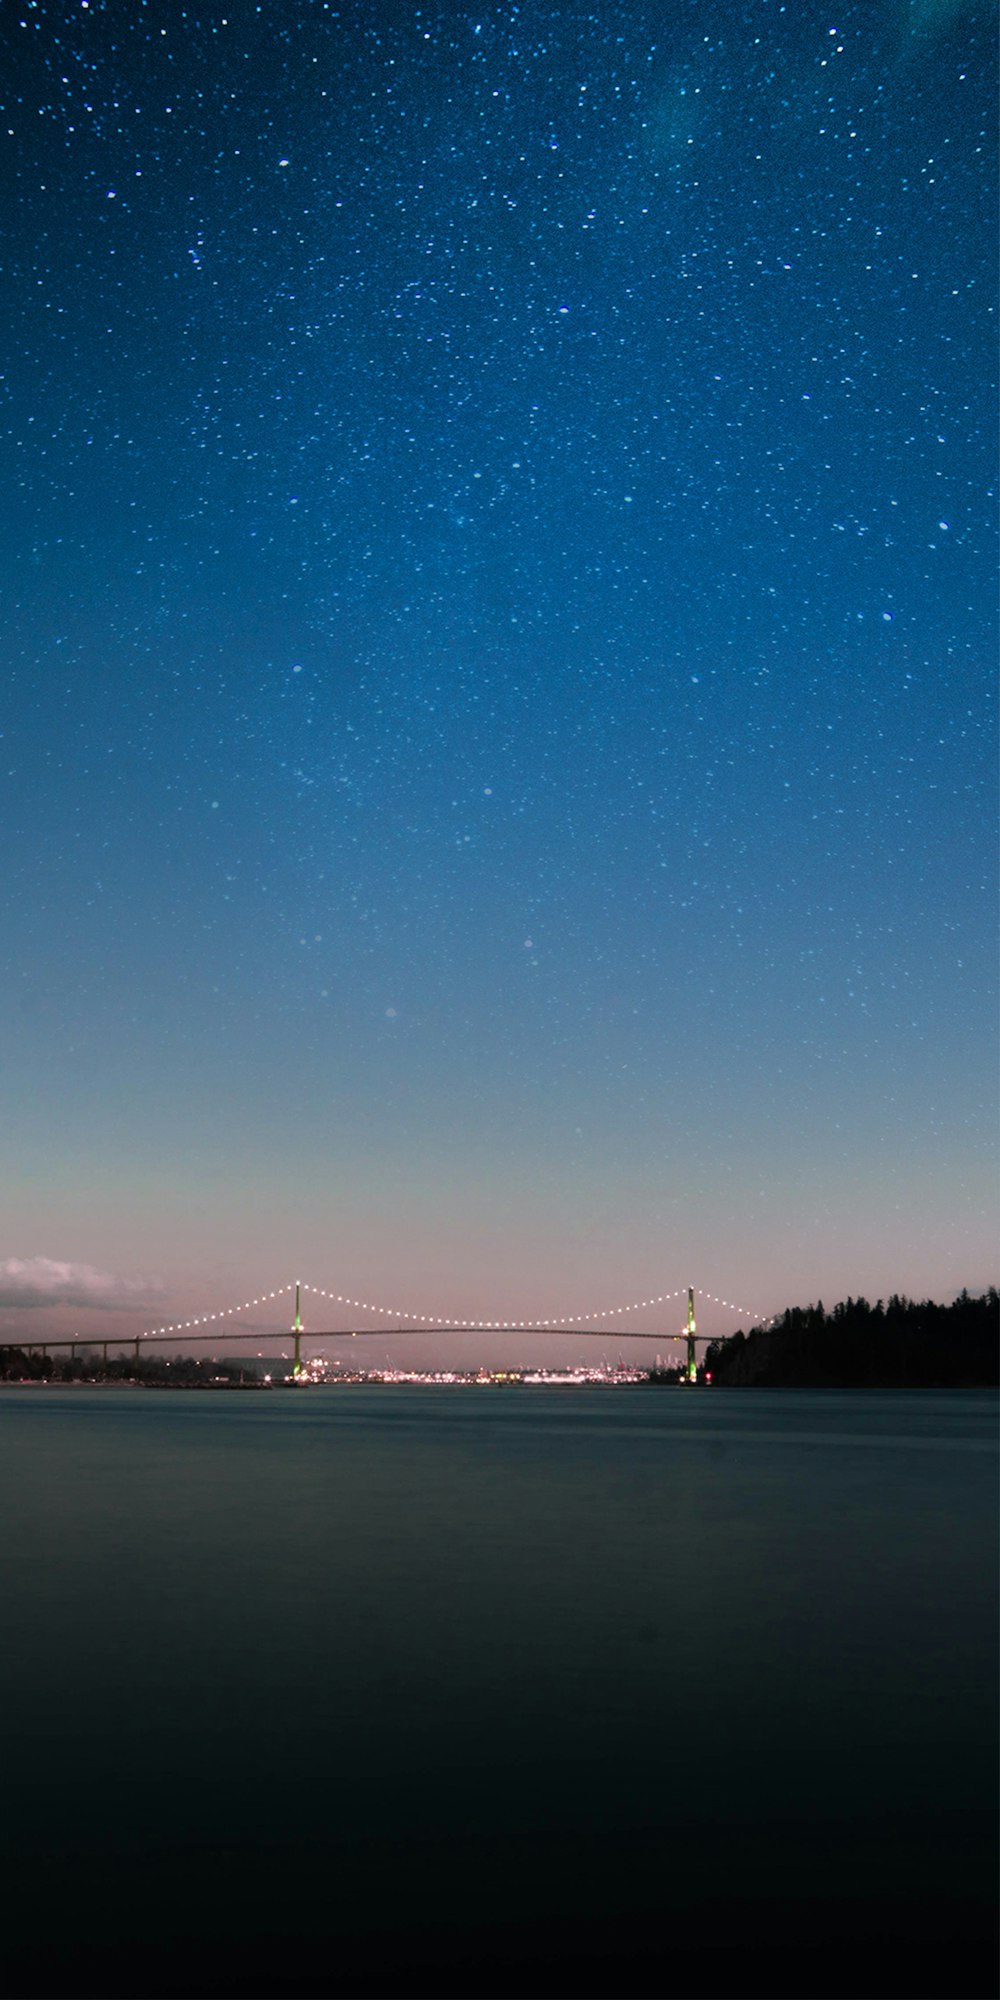 lighted bridge under blue and white sky at night